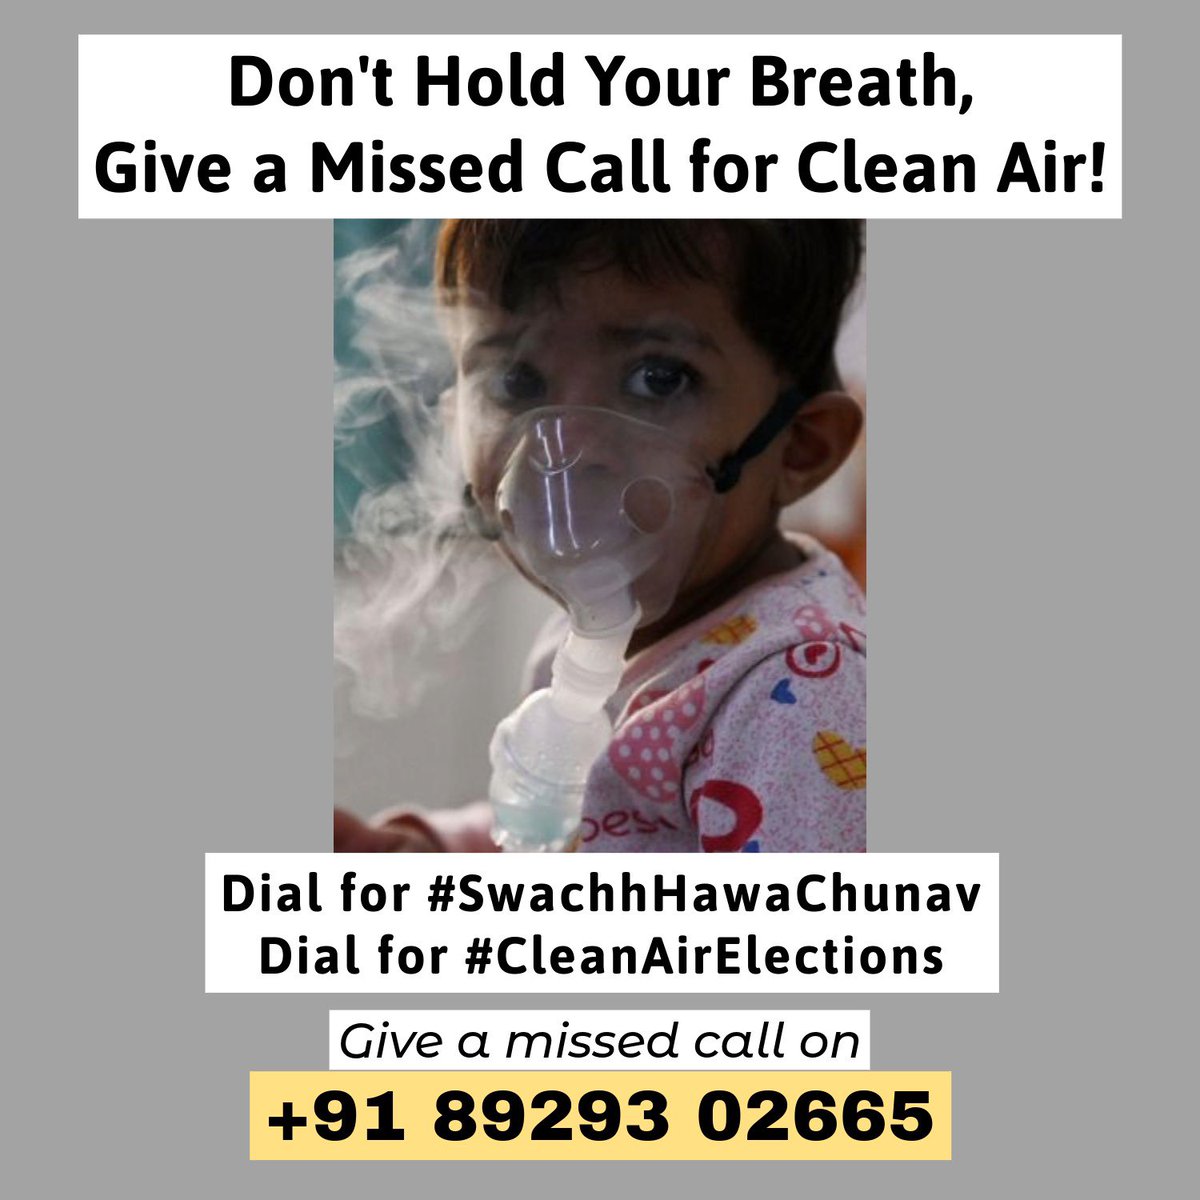 Let's Ensure Every Child's Right to #CleanAir; Let’s demand #SwachhHawaChunav #CleanAirElections💙 Give a missed call on +91 89293 02665💙